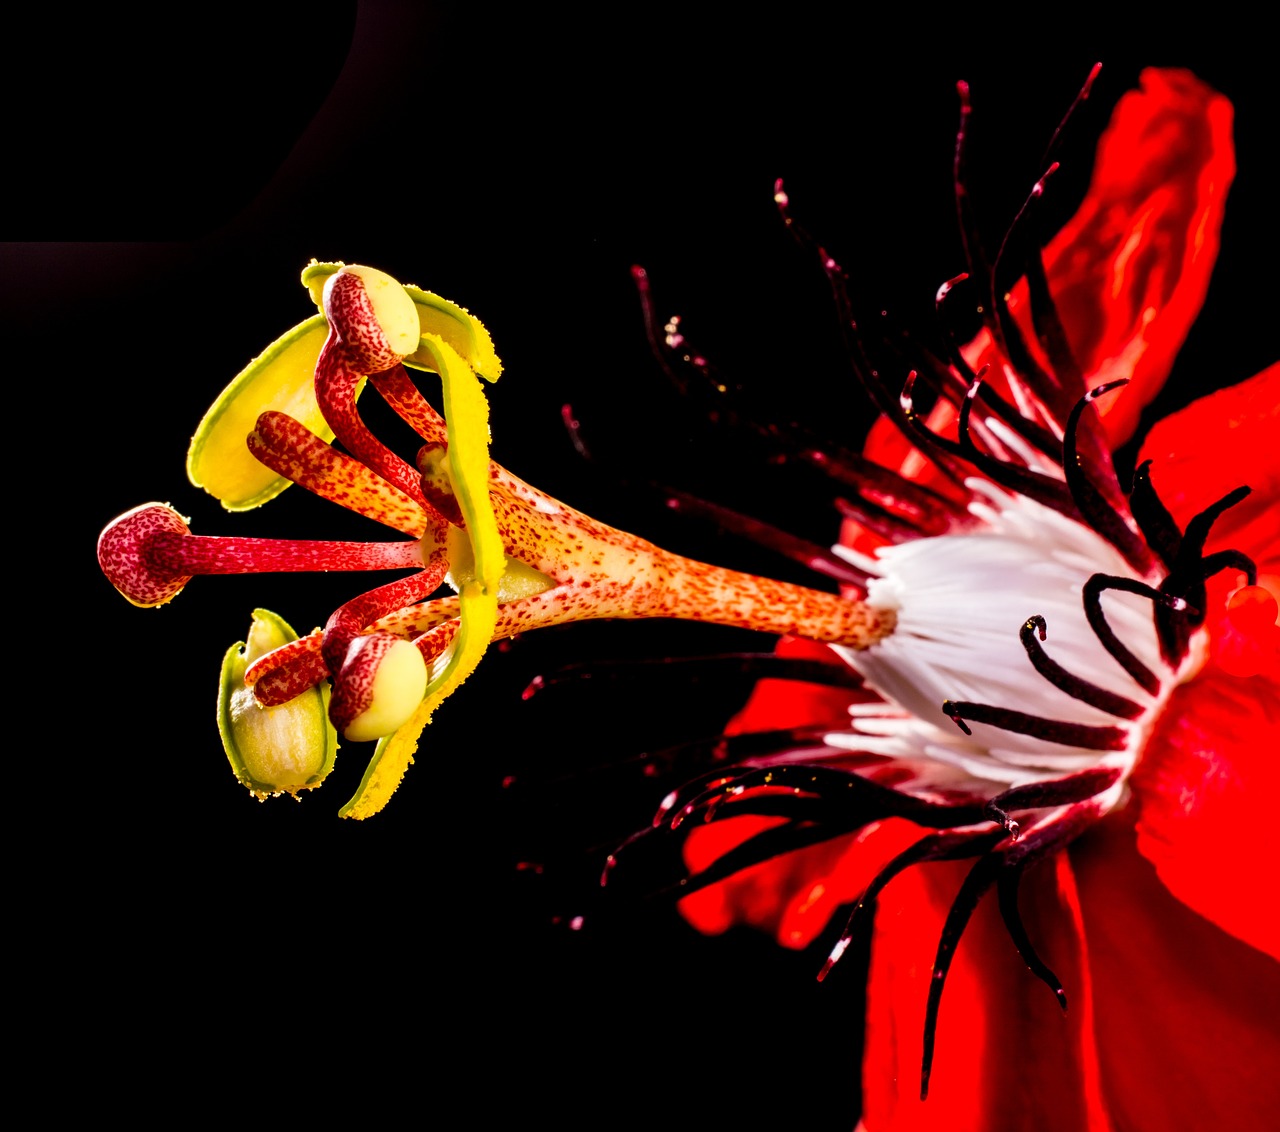 a close up of a red flower on a black background, a macro photograph, art photography, passion flower, red-yellow colors, highly microdetailed, hibiscus